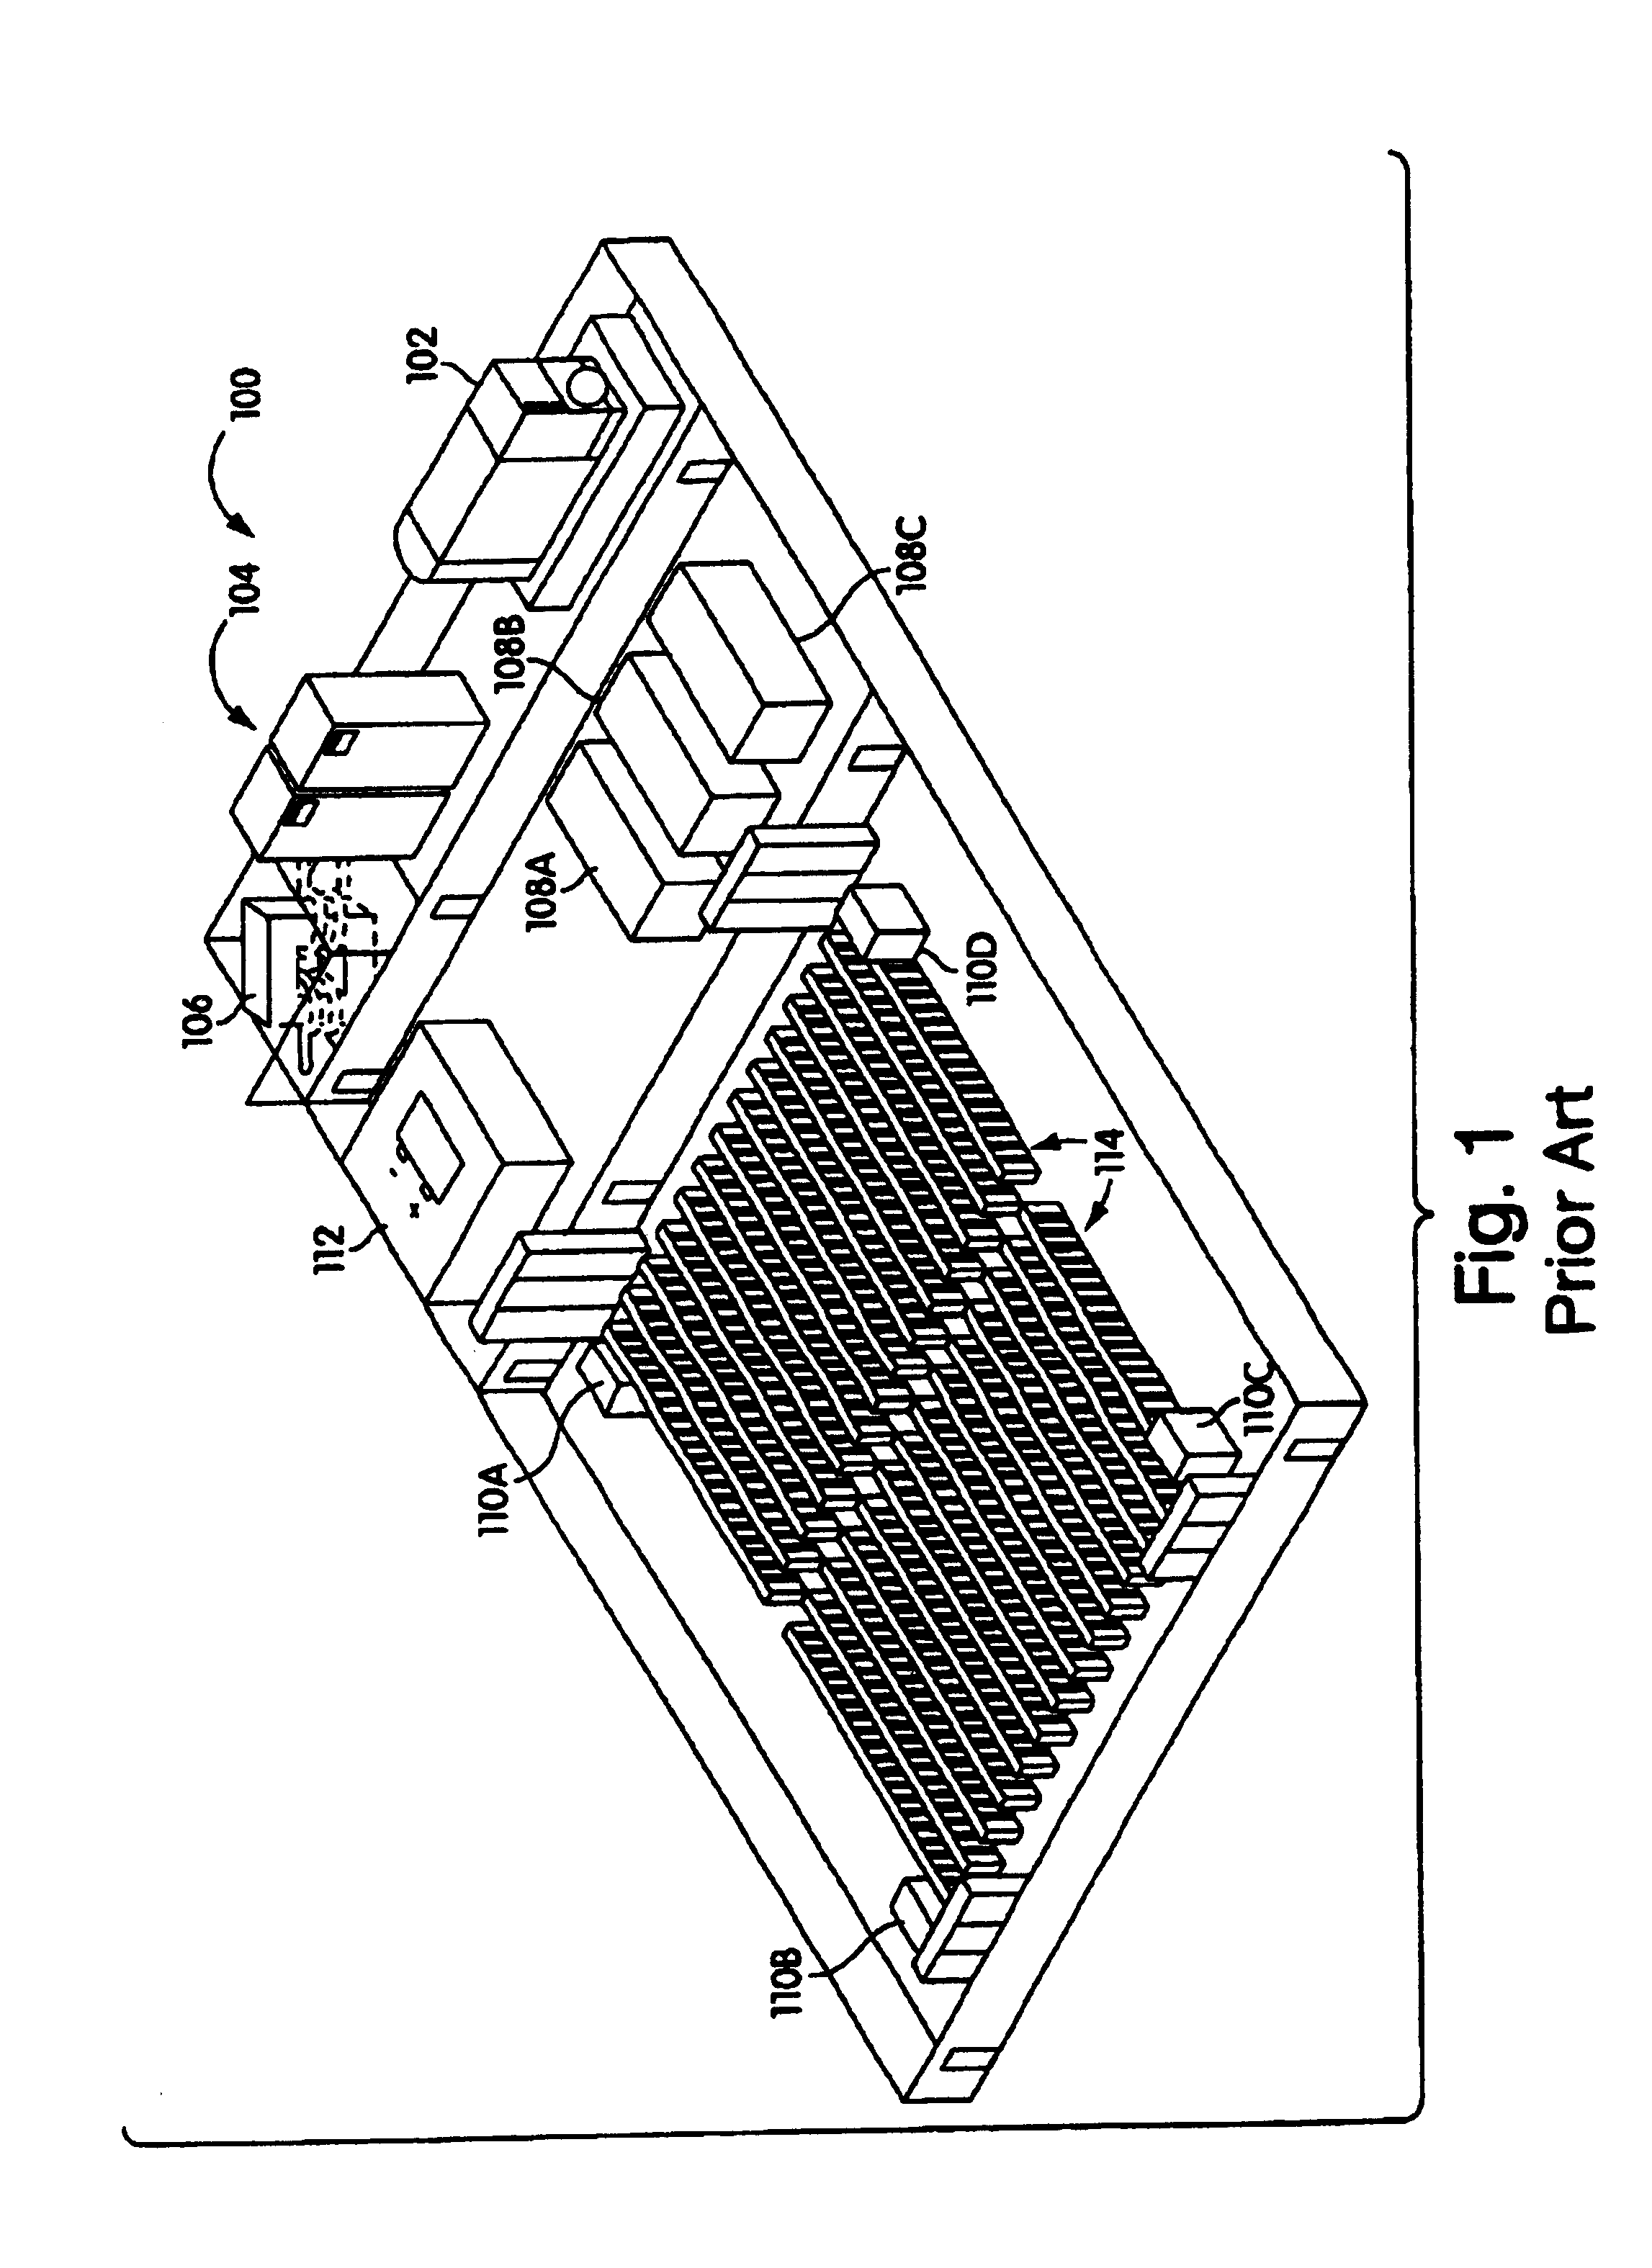 Adjustable scalable rack power system and method